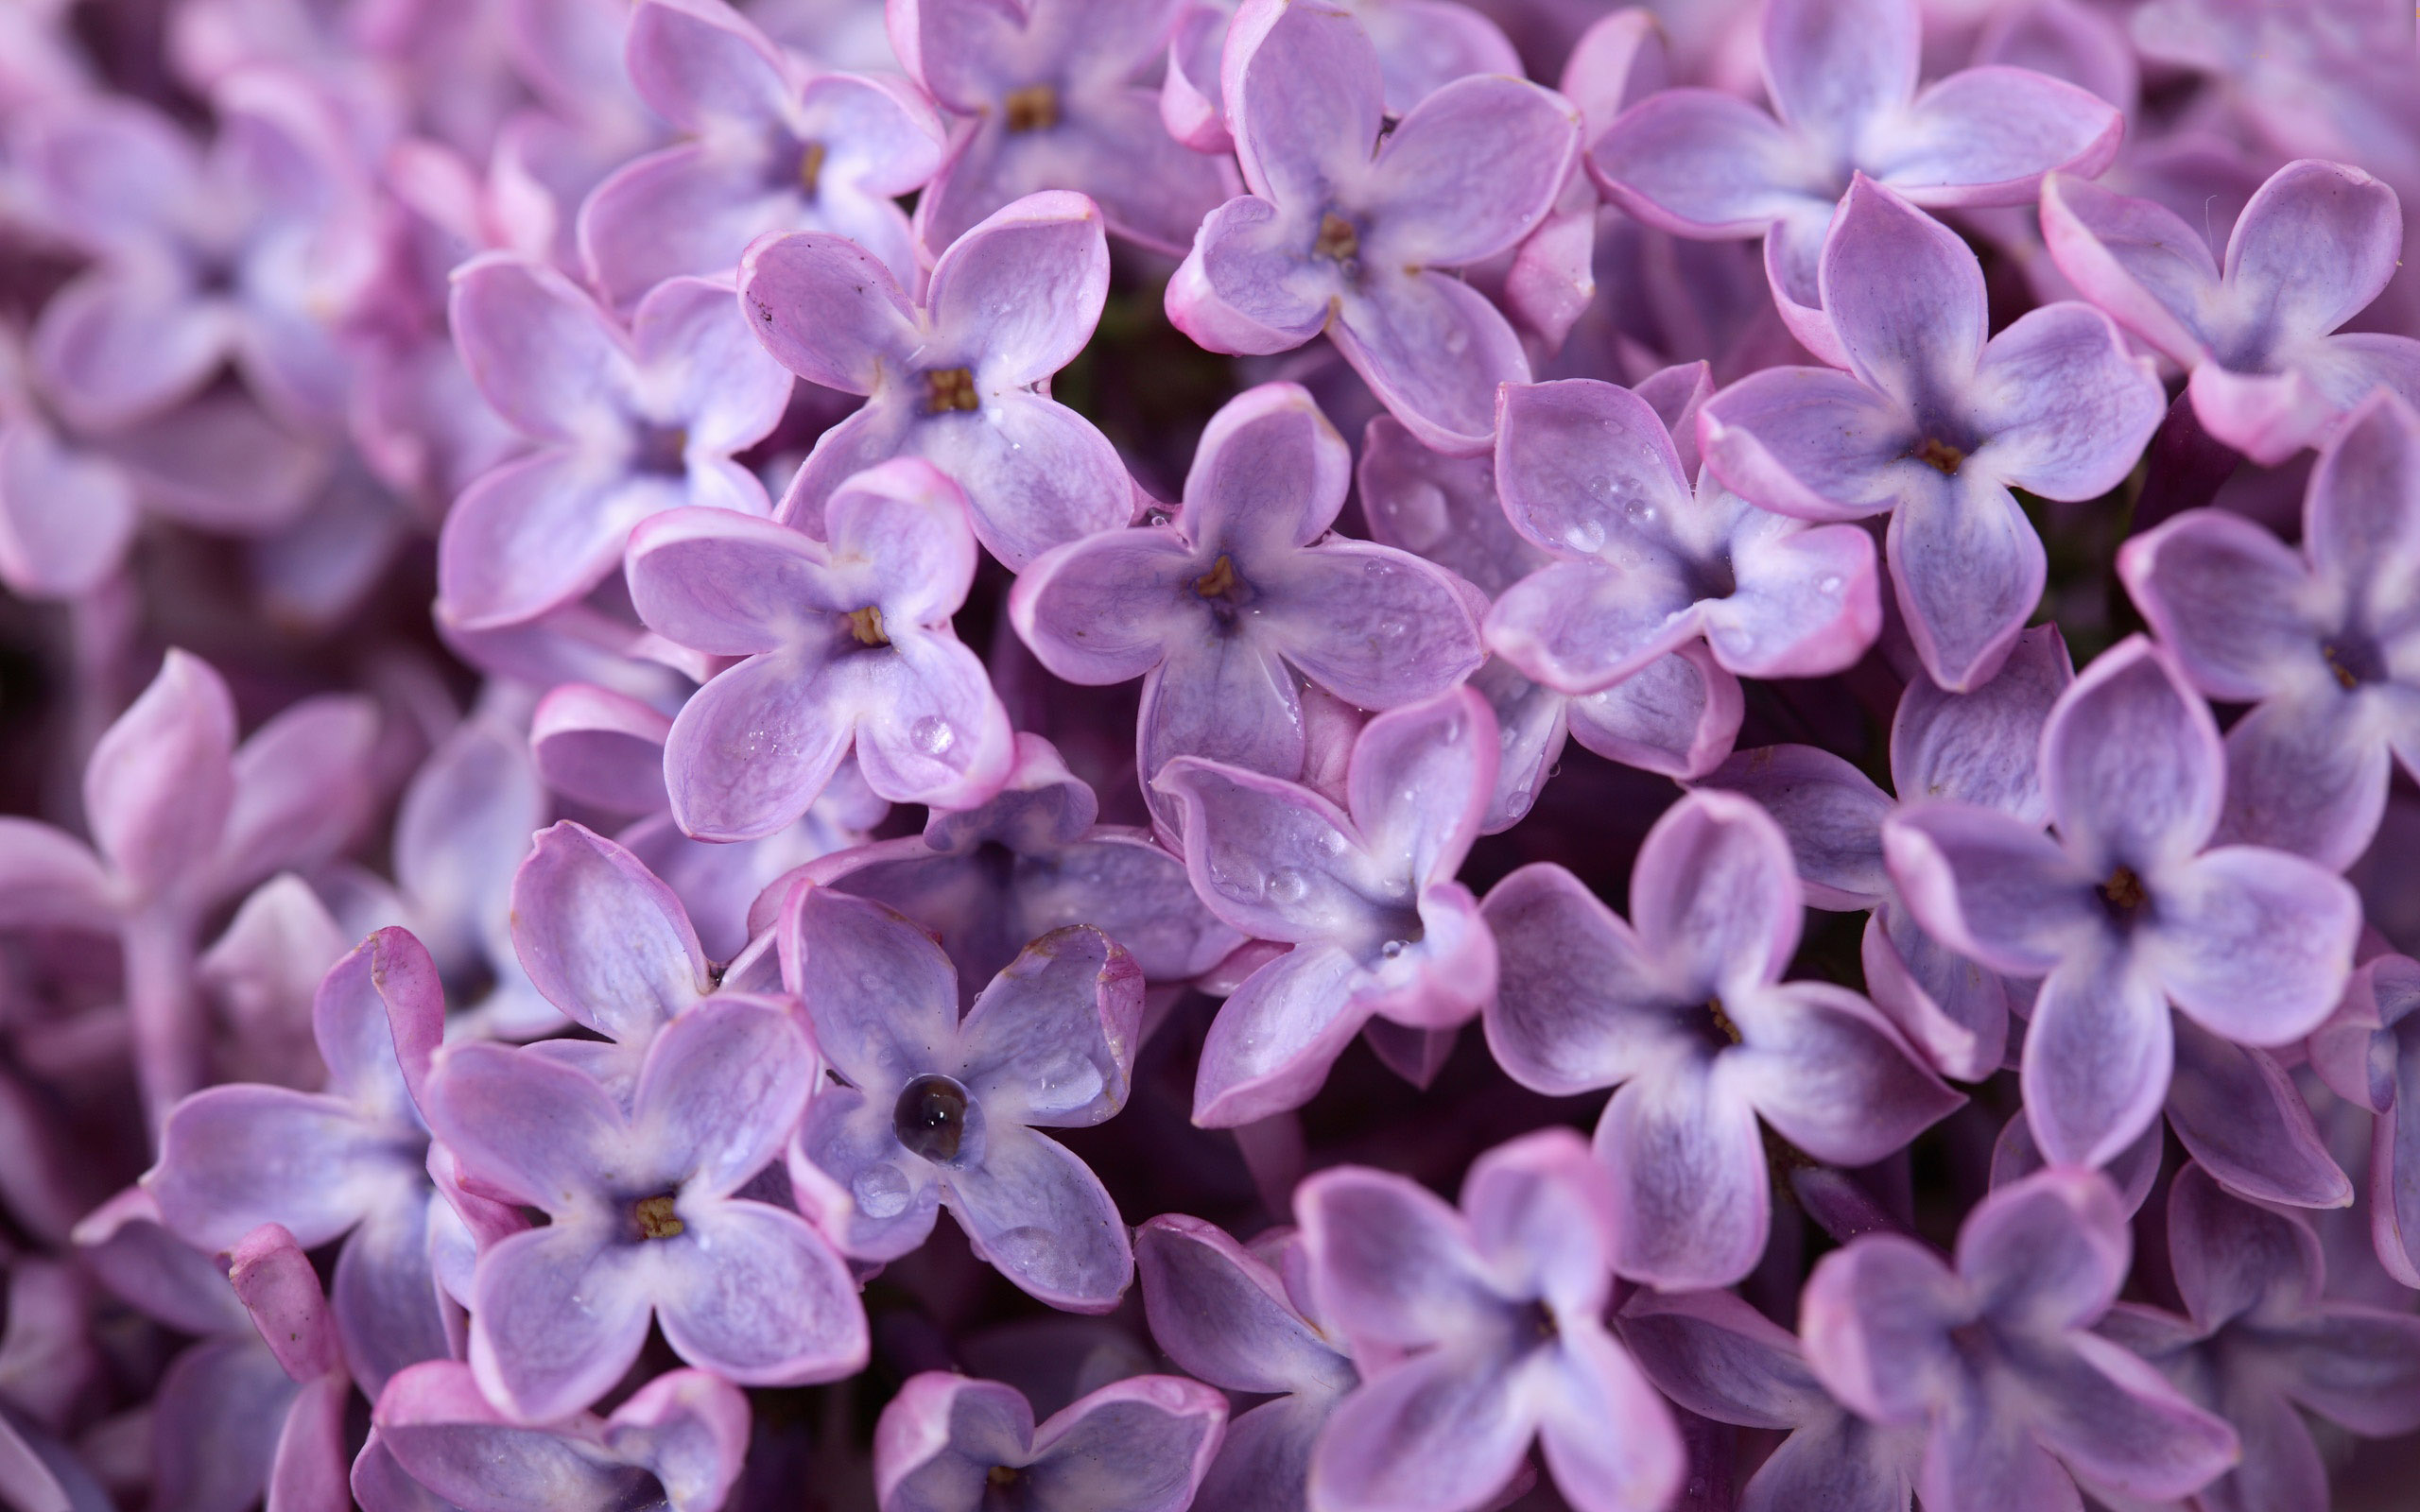 Lilac Wallpapers: Purple Lilacs Flowers Nature Background Wallpapers On Desktop 2560x1600px